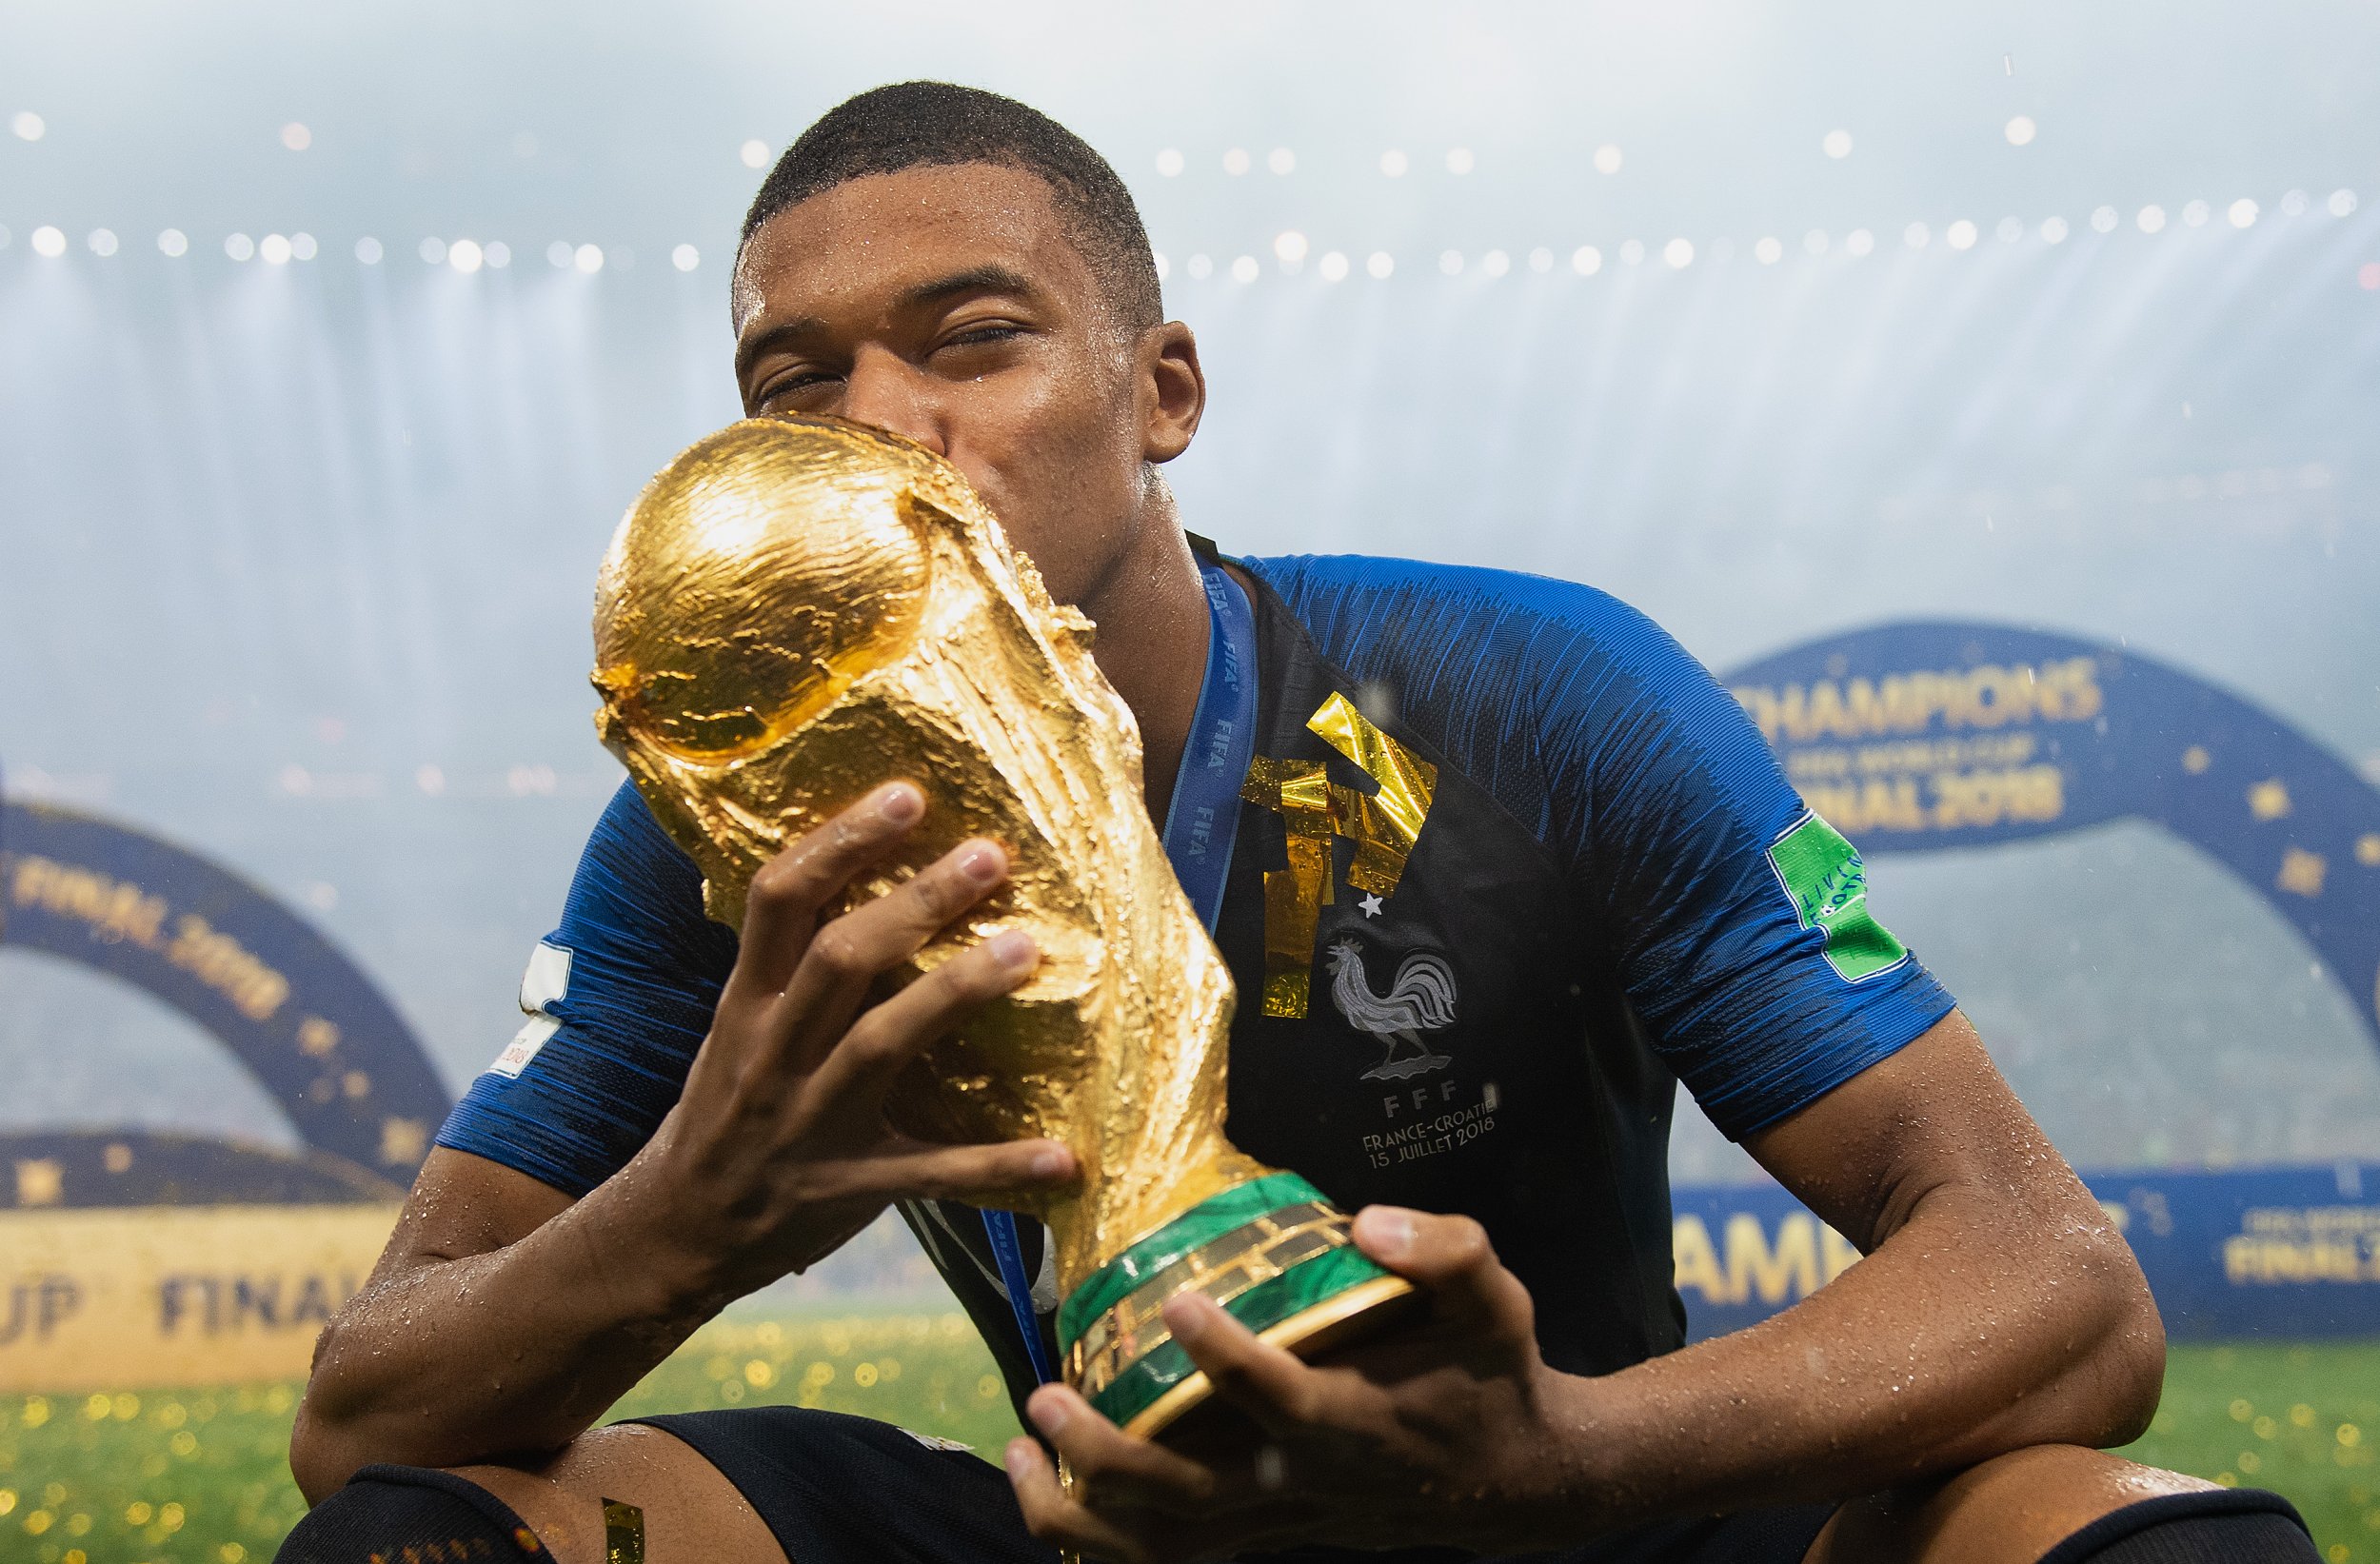 Kylian Mbappe Named World Cup Best Young Player: How Have the Previous